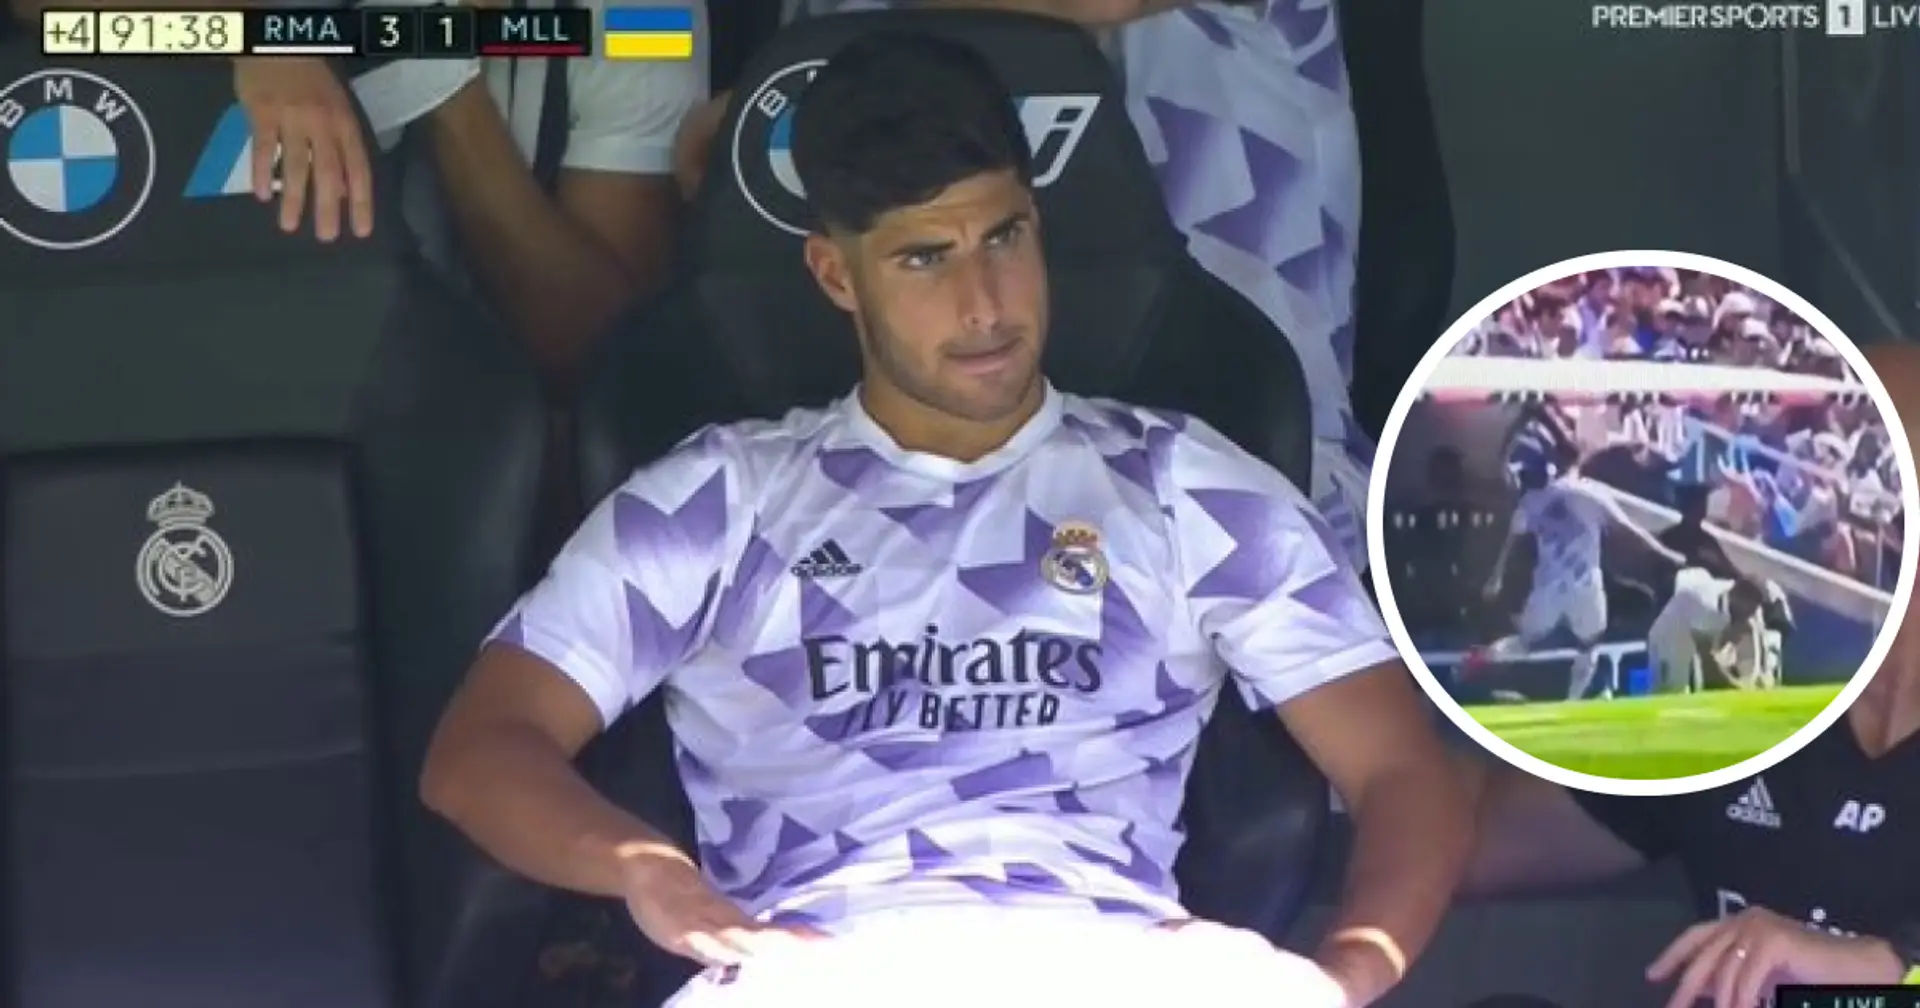 Asensio throws his bib and kicks water bottle in front of Ancelotti after not playing against Mallorca – spotted